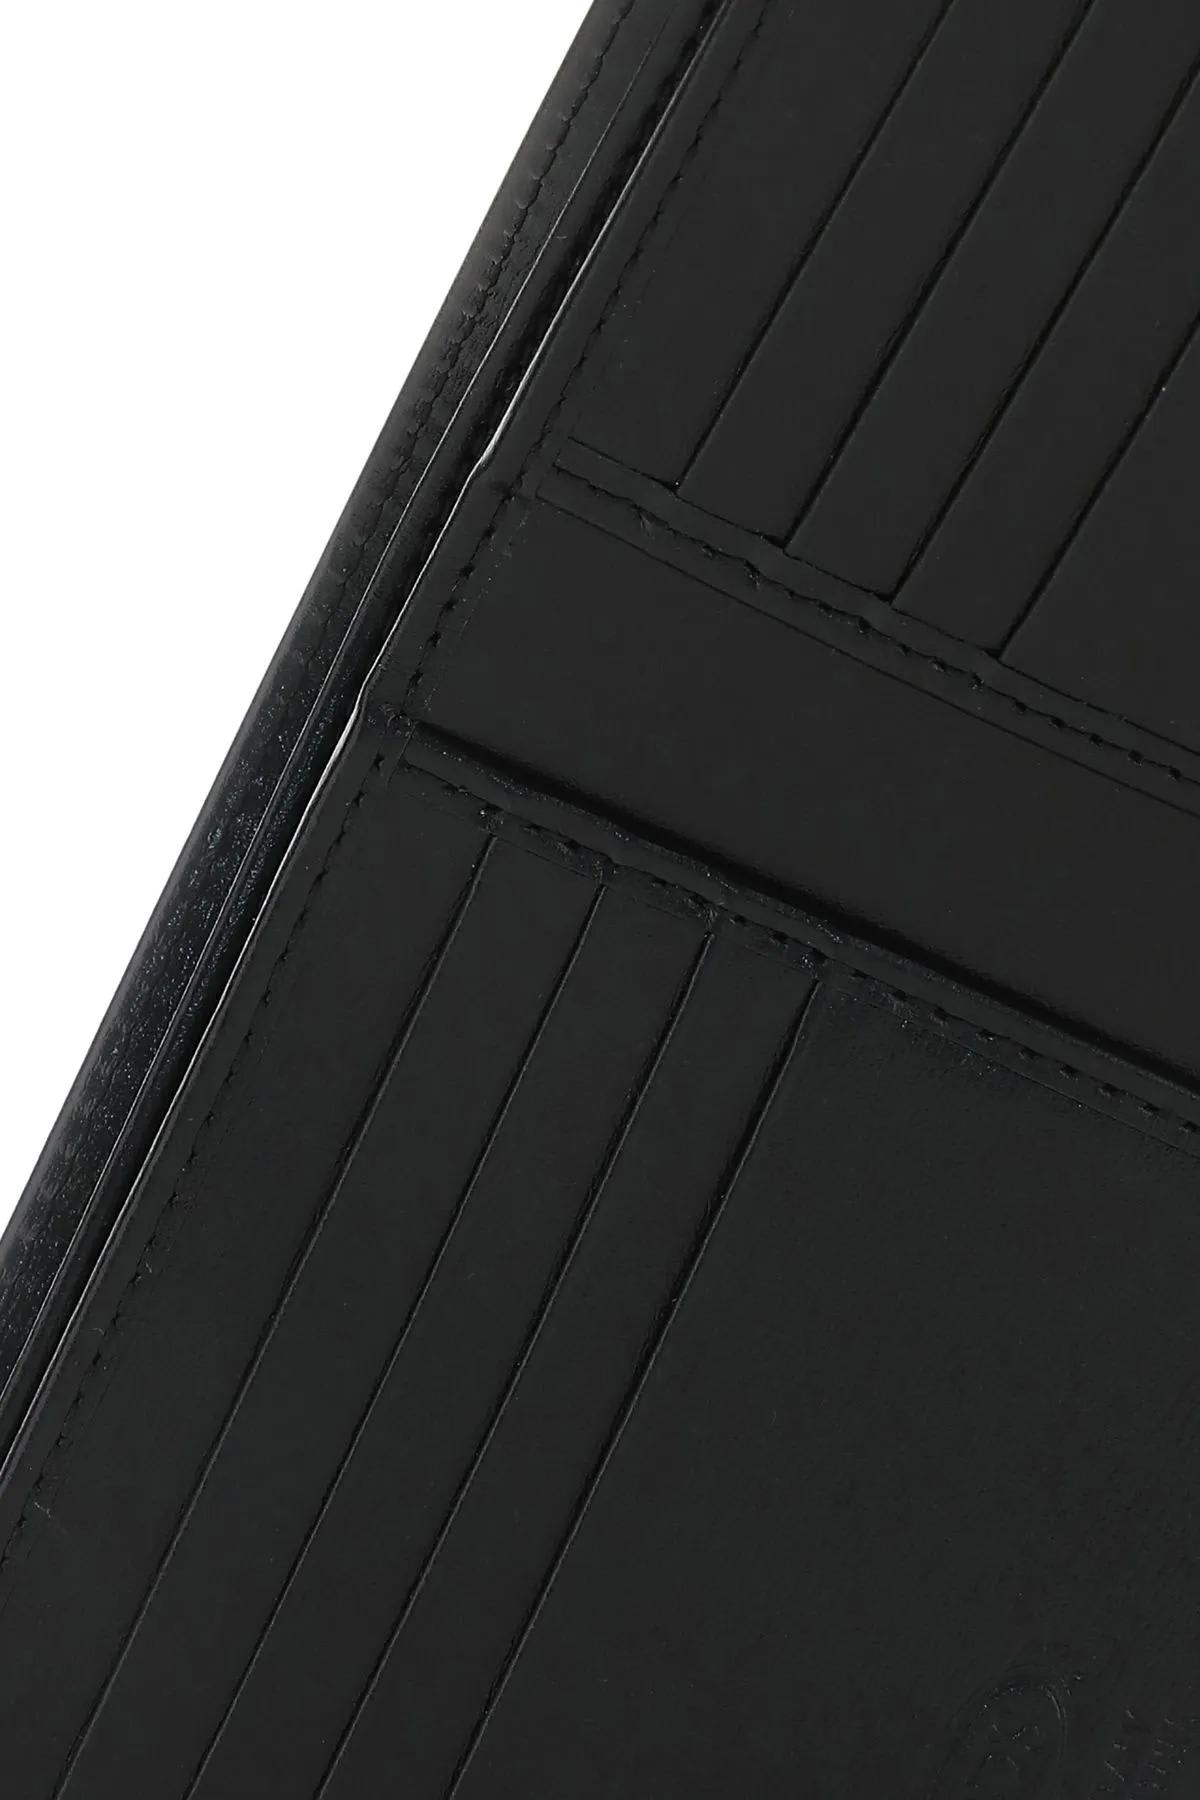 Shop Tod's Black Leather Wallet Tods